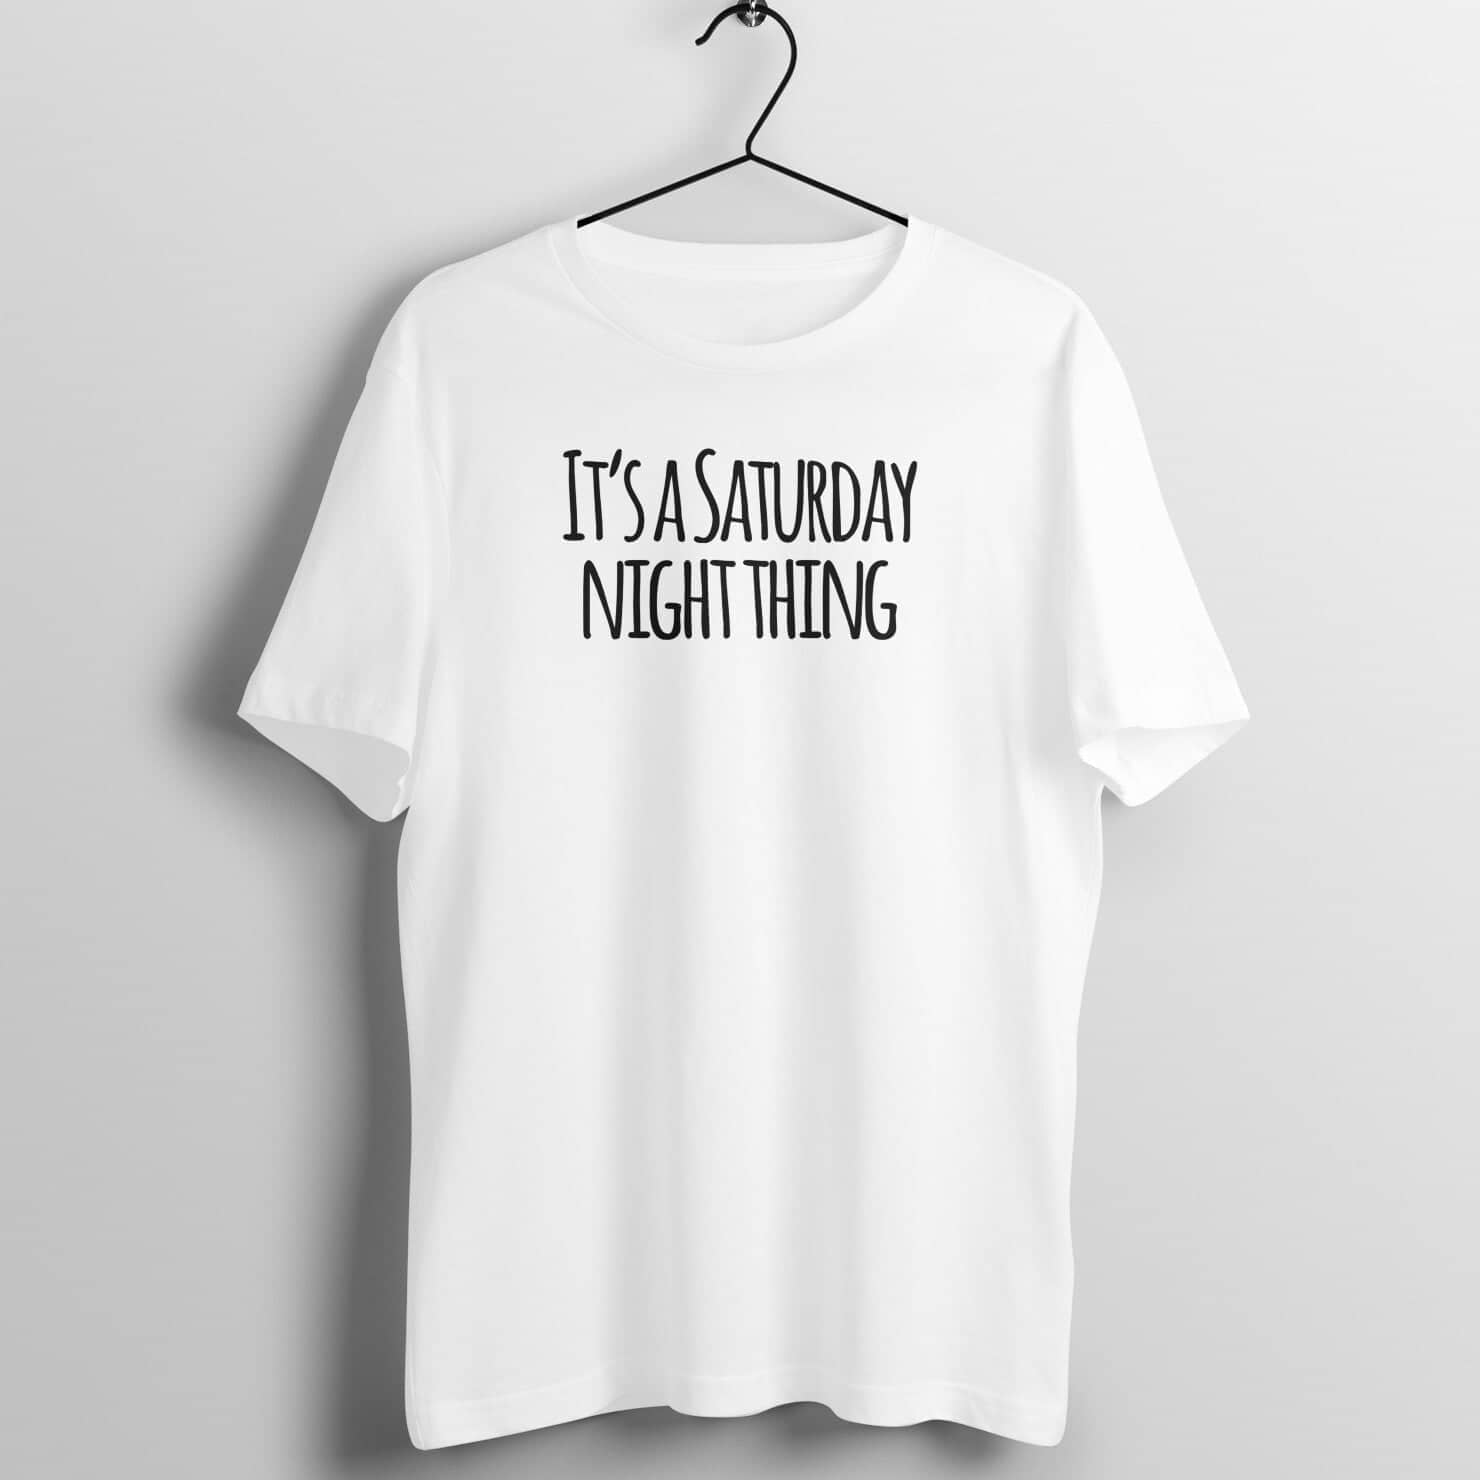 It's a Saturday Night Thing White Party T Shirt for Men and Women Shirts & Tops Printrove White S 